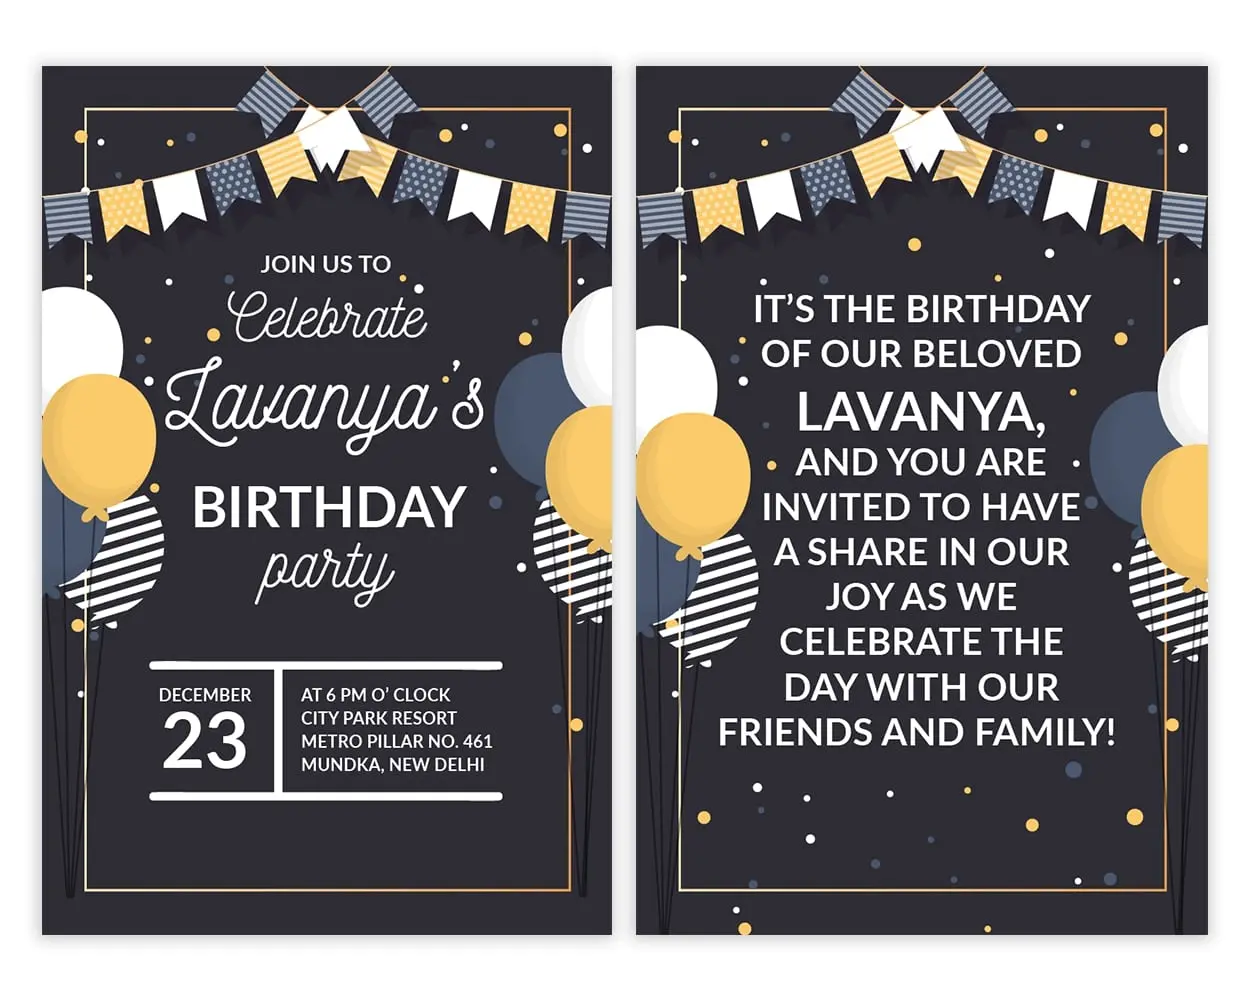 All Sides of Design Number 6 for Invitation Cards for Birthday Parties